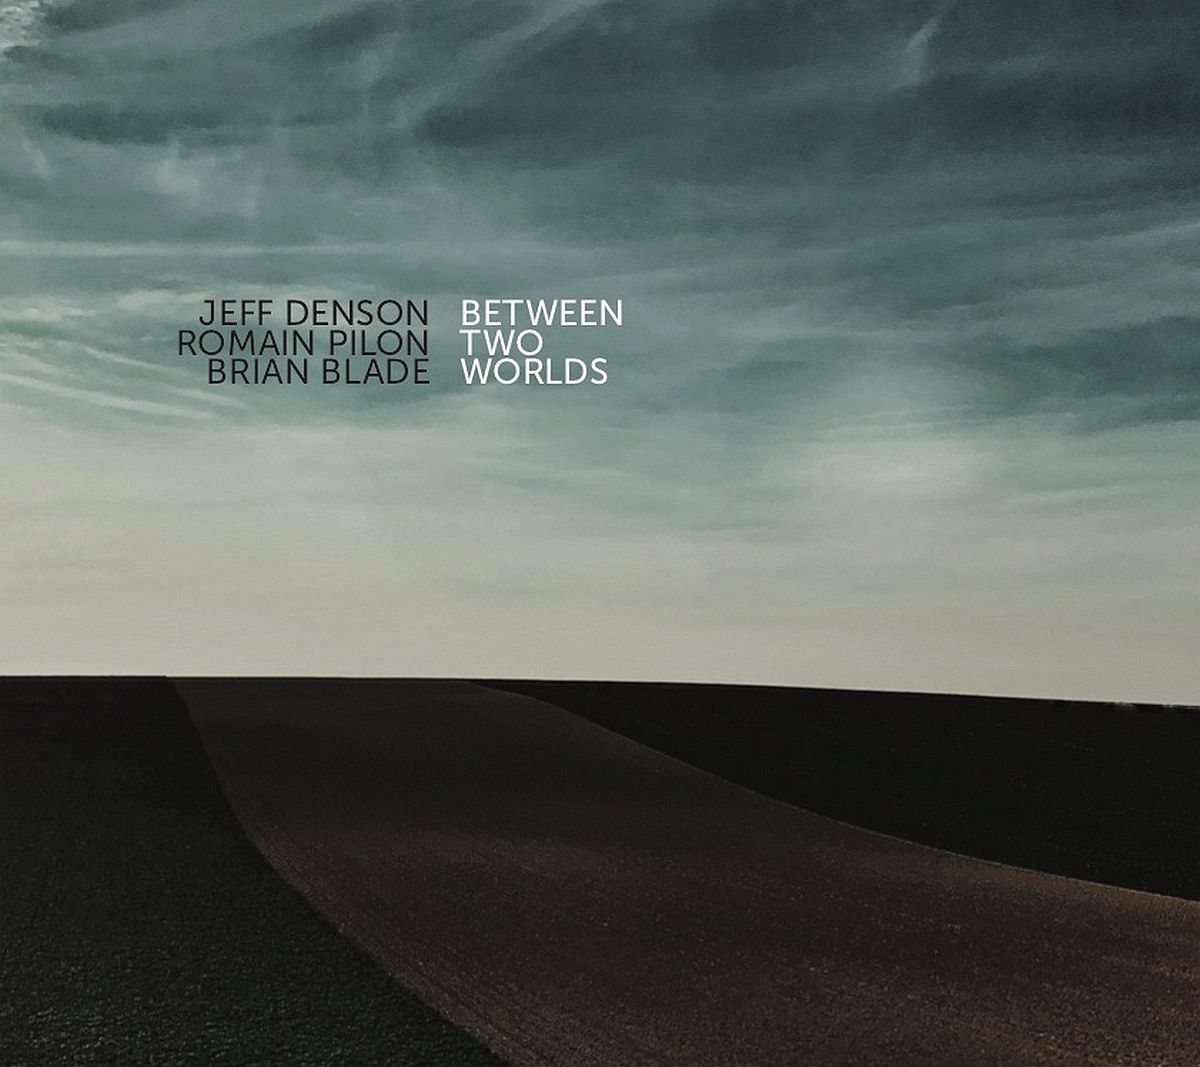 Denson_Between_Two_Worlds_Cover